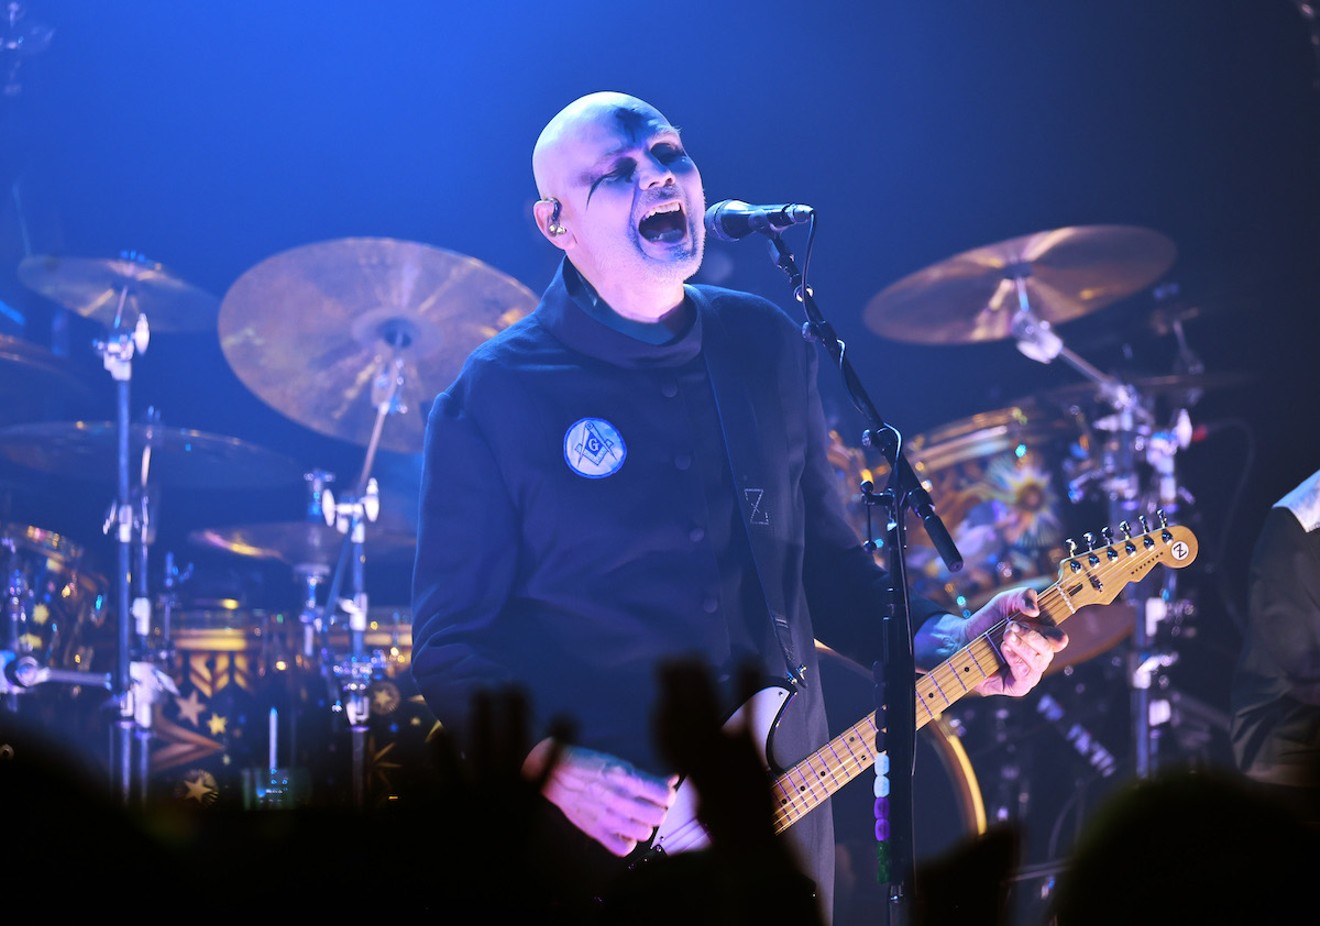 Billy Corgan of the Smashing Pumpkins performing at Irving Plaza in New York City on September 22.